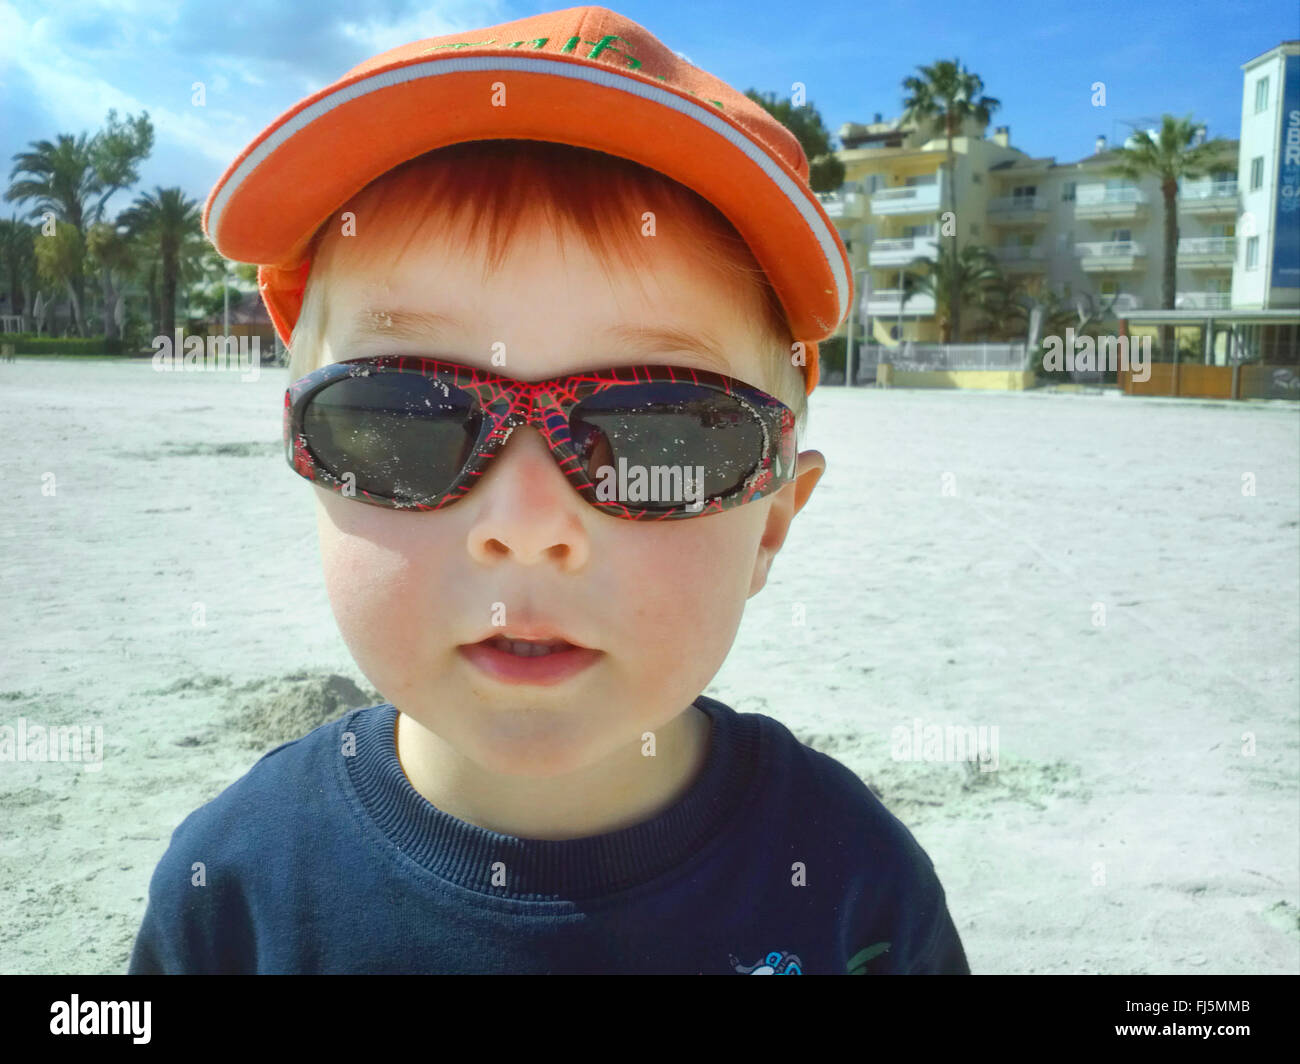 cool little boy with sunglasses and baseball cap, Netherlands Stock Photo